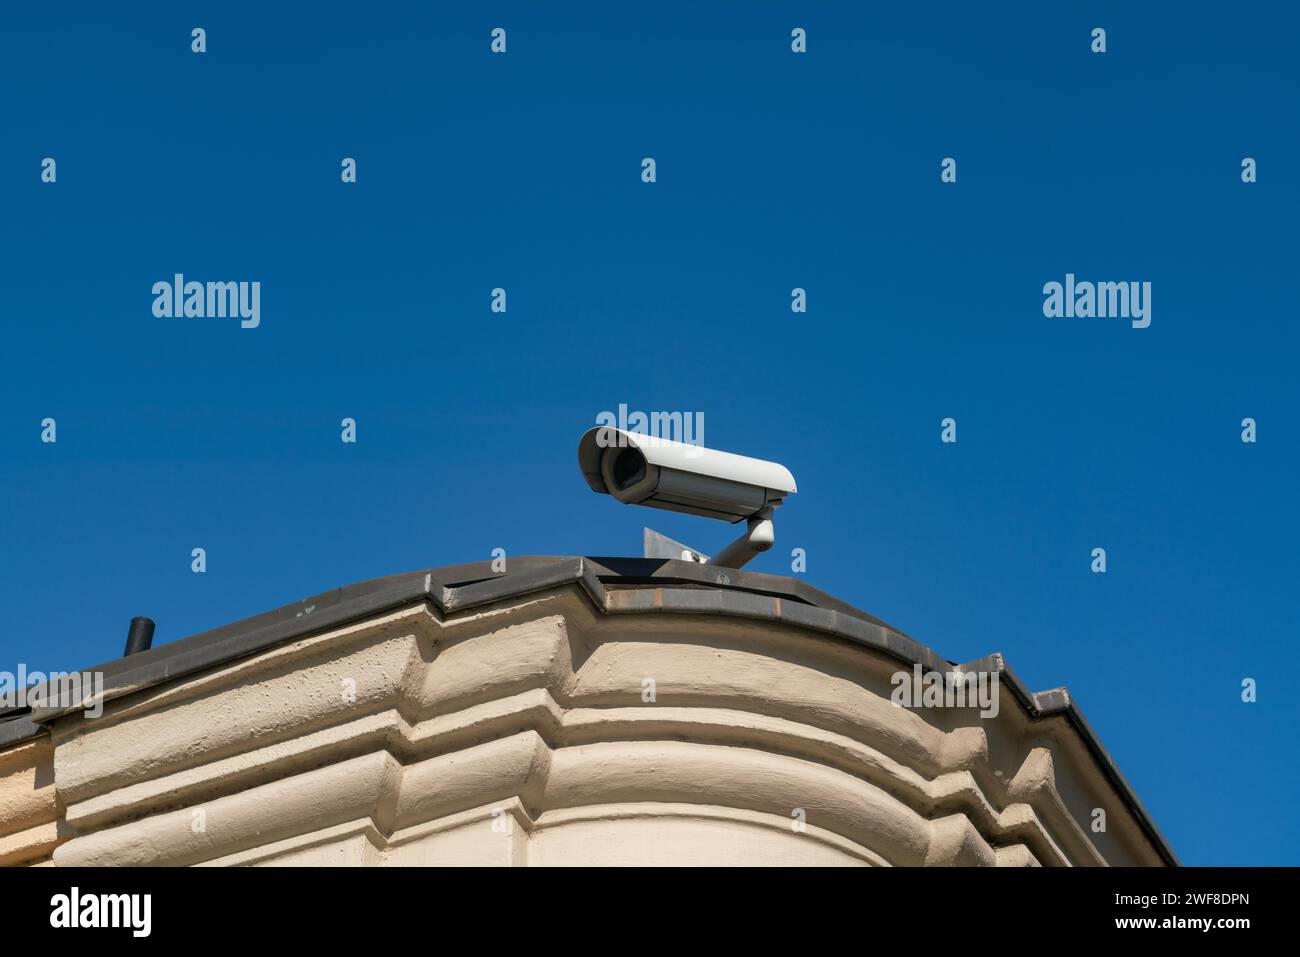 Surveillance video cameras placed to control buildings and entrances help to verify crimes and area security. big brother will have more and more supp Stock Photo